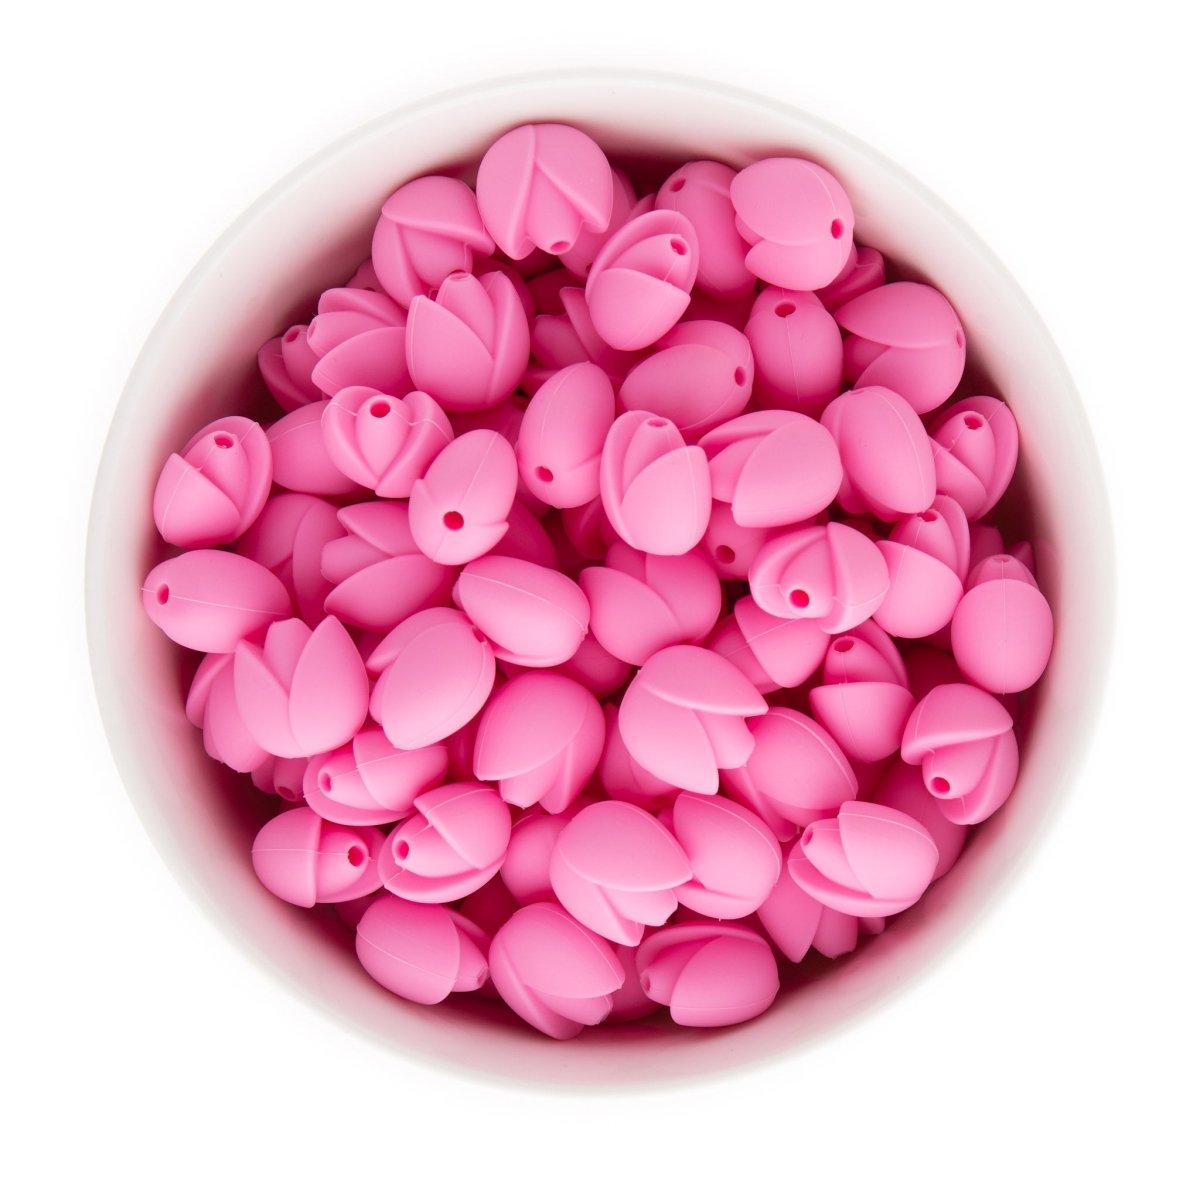 Silicone Focal Beads Tulips Cotton Candy Pink from Cara & Co Craft Supply